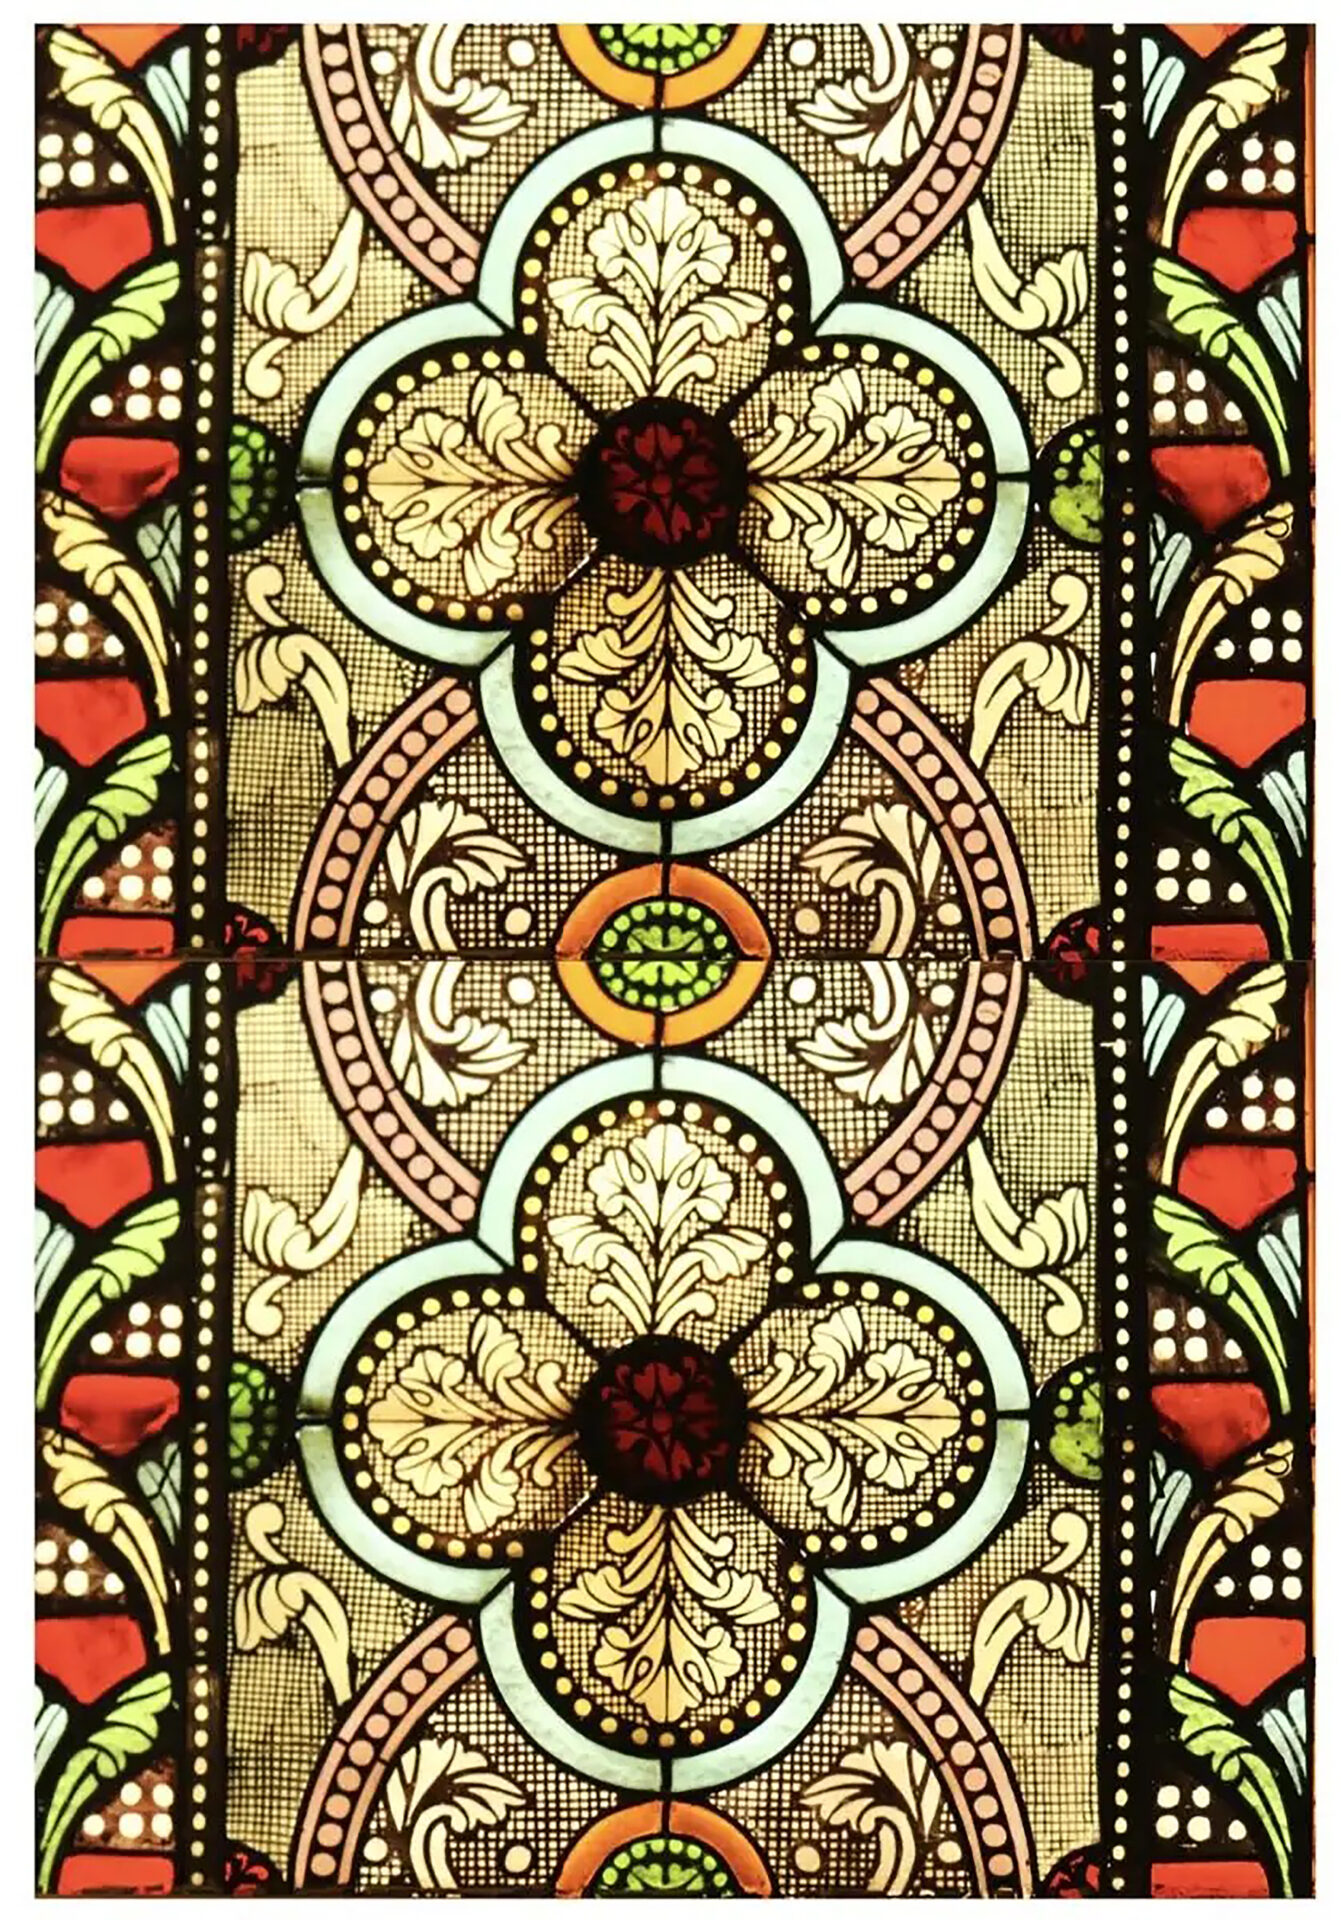 featured in the russell nashville, a Stained Glass Window with flowers and swirls in orange, green, and browns 